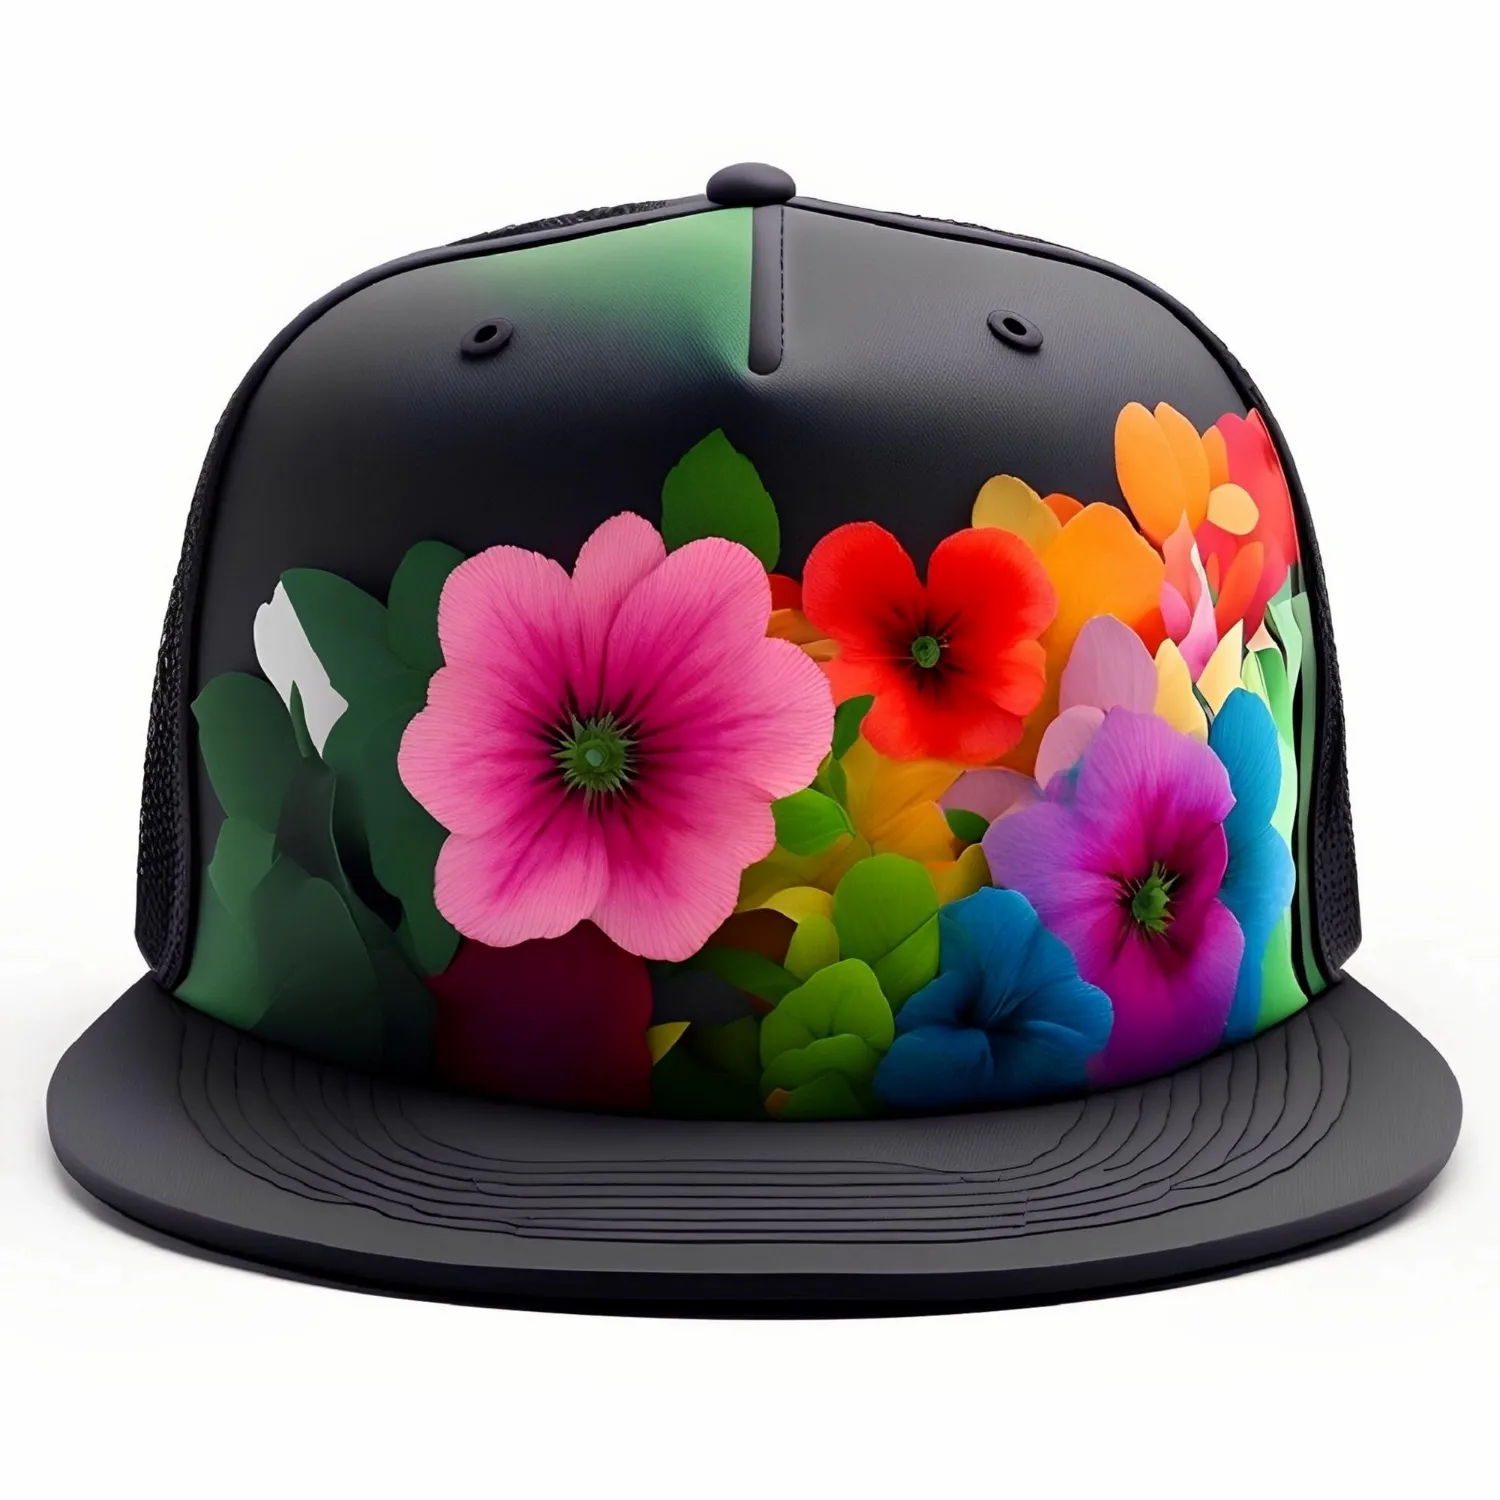 A hat with a colorful design is on a white background